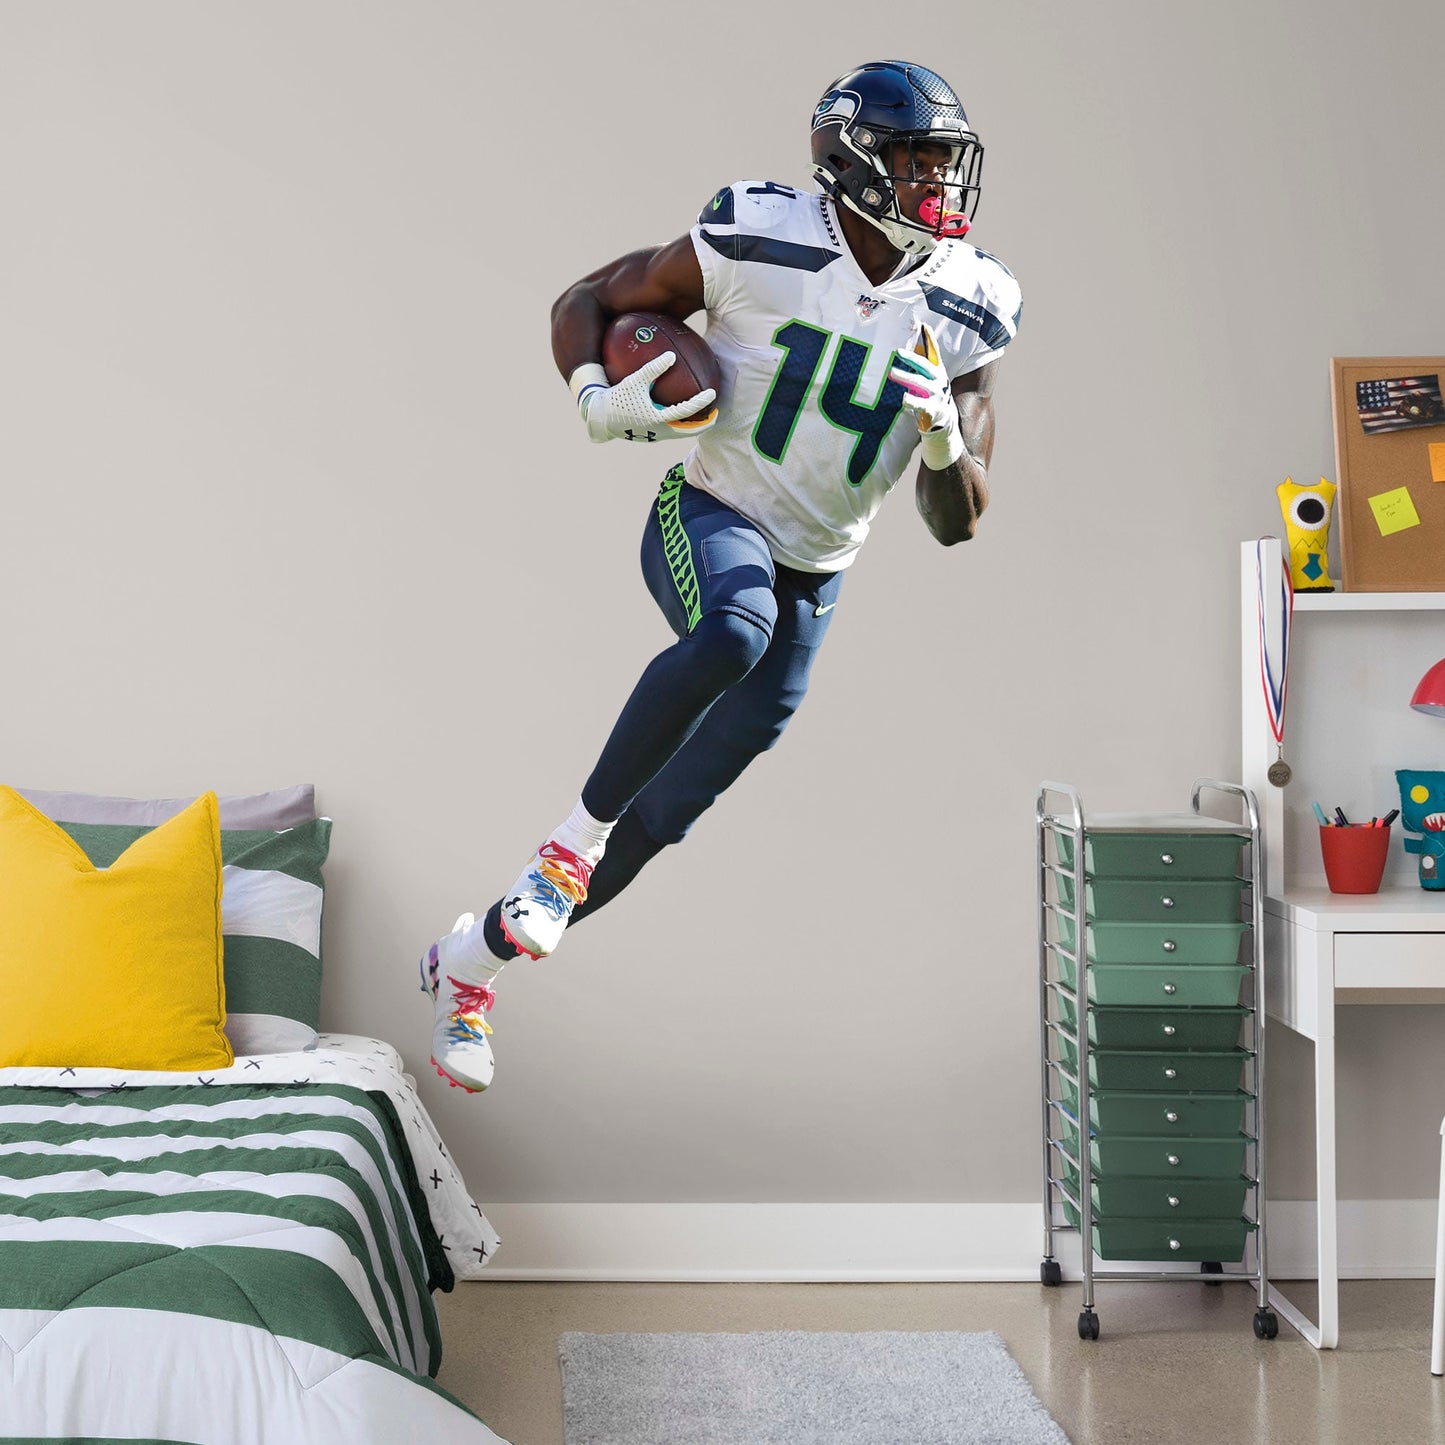 Life-Size Athlete + 2 Decals (45"W x 78"H) Outmaneuver boring walls with this removable wall decal featuring D.K. Metcalf showing other players how to roll with it. This quality, giftable decal showcases Baby Bron in mid-sprint, clutching the football defensively while wearing the Seahawks' signature College Navy, Action Green, and Wolf Gray colors. This durable decal will help you demonstrate a strong offense in your bedroom, office, or entertainment room.